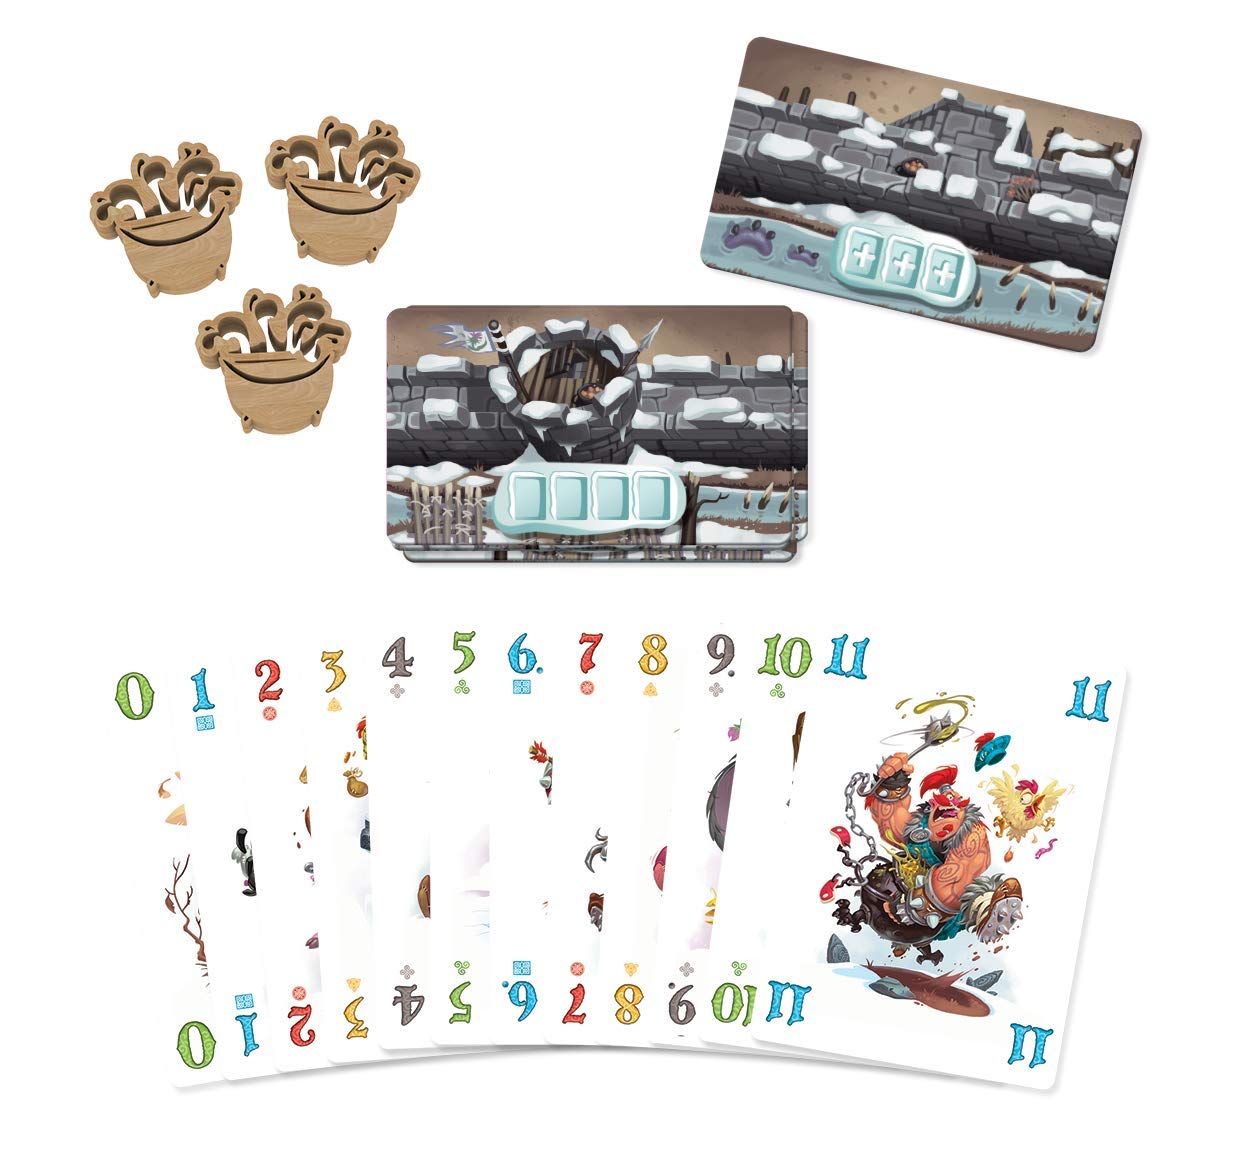 IELLO: Schotten Totten 2, Sequel, Strategy Card Game, Great for On The Go Gaming, 20 Minute Play Time, 2 Player, for Ages 8 and Up